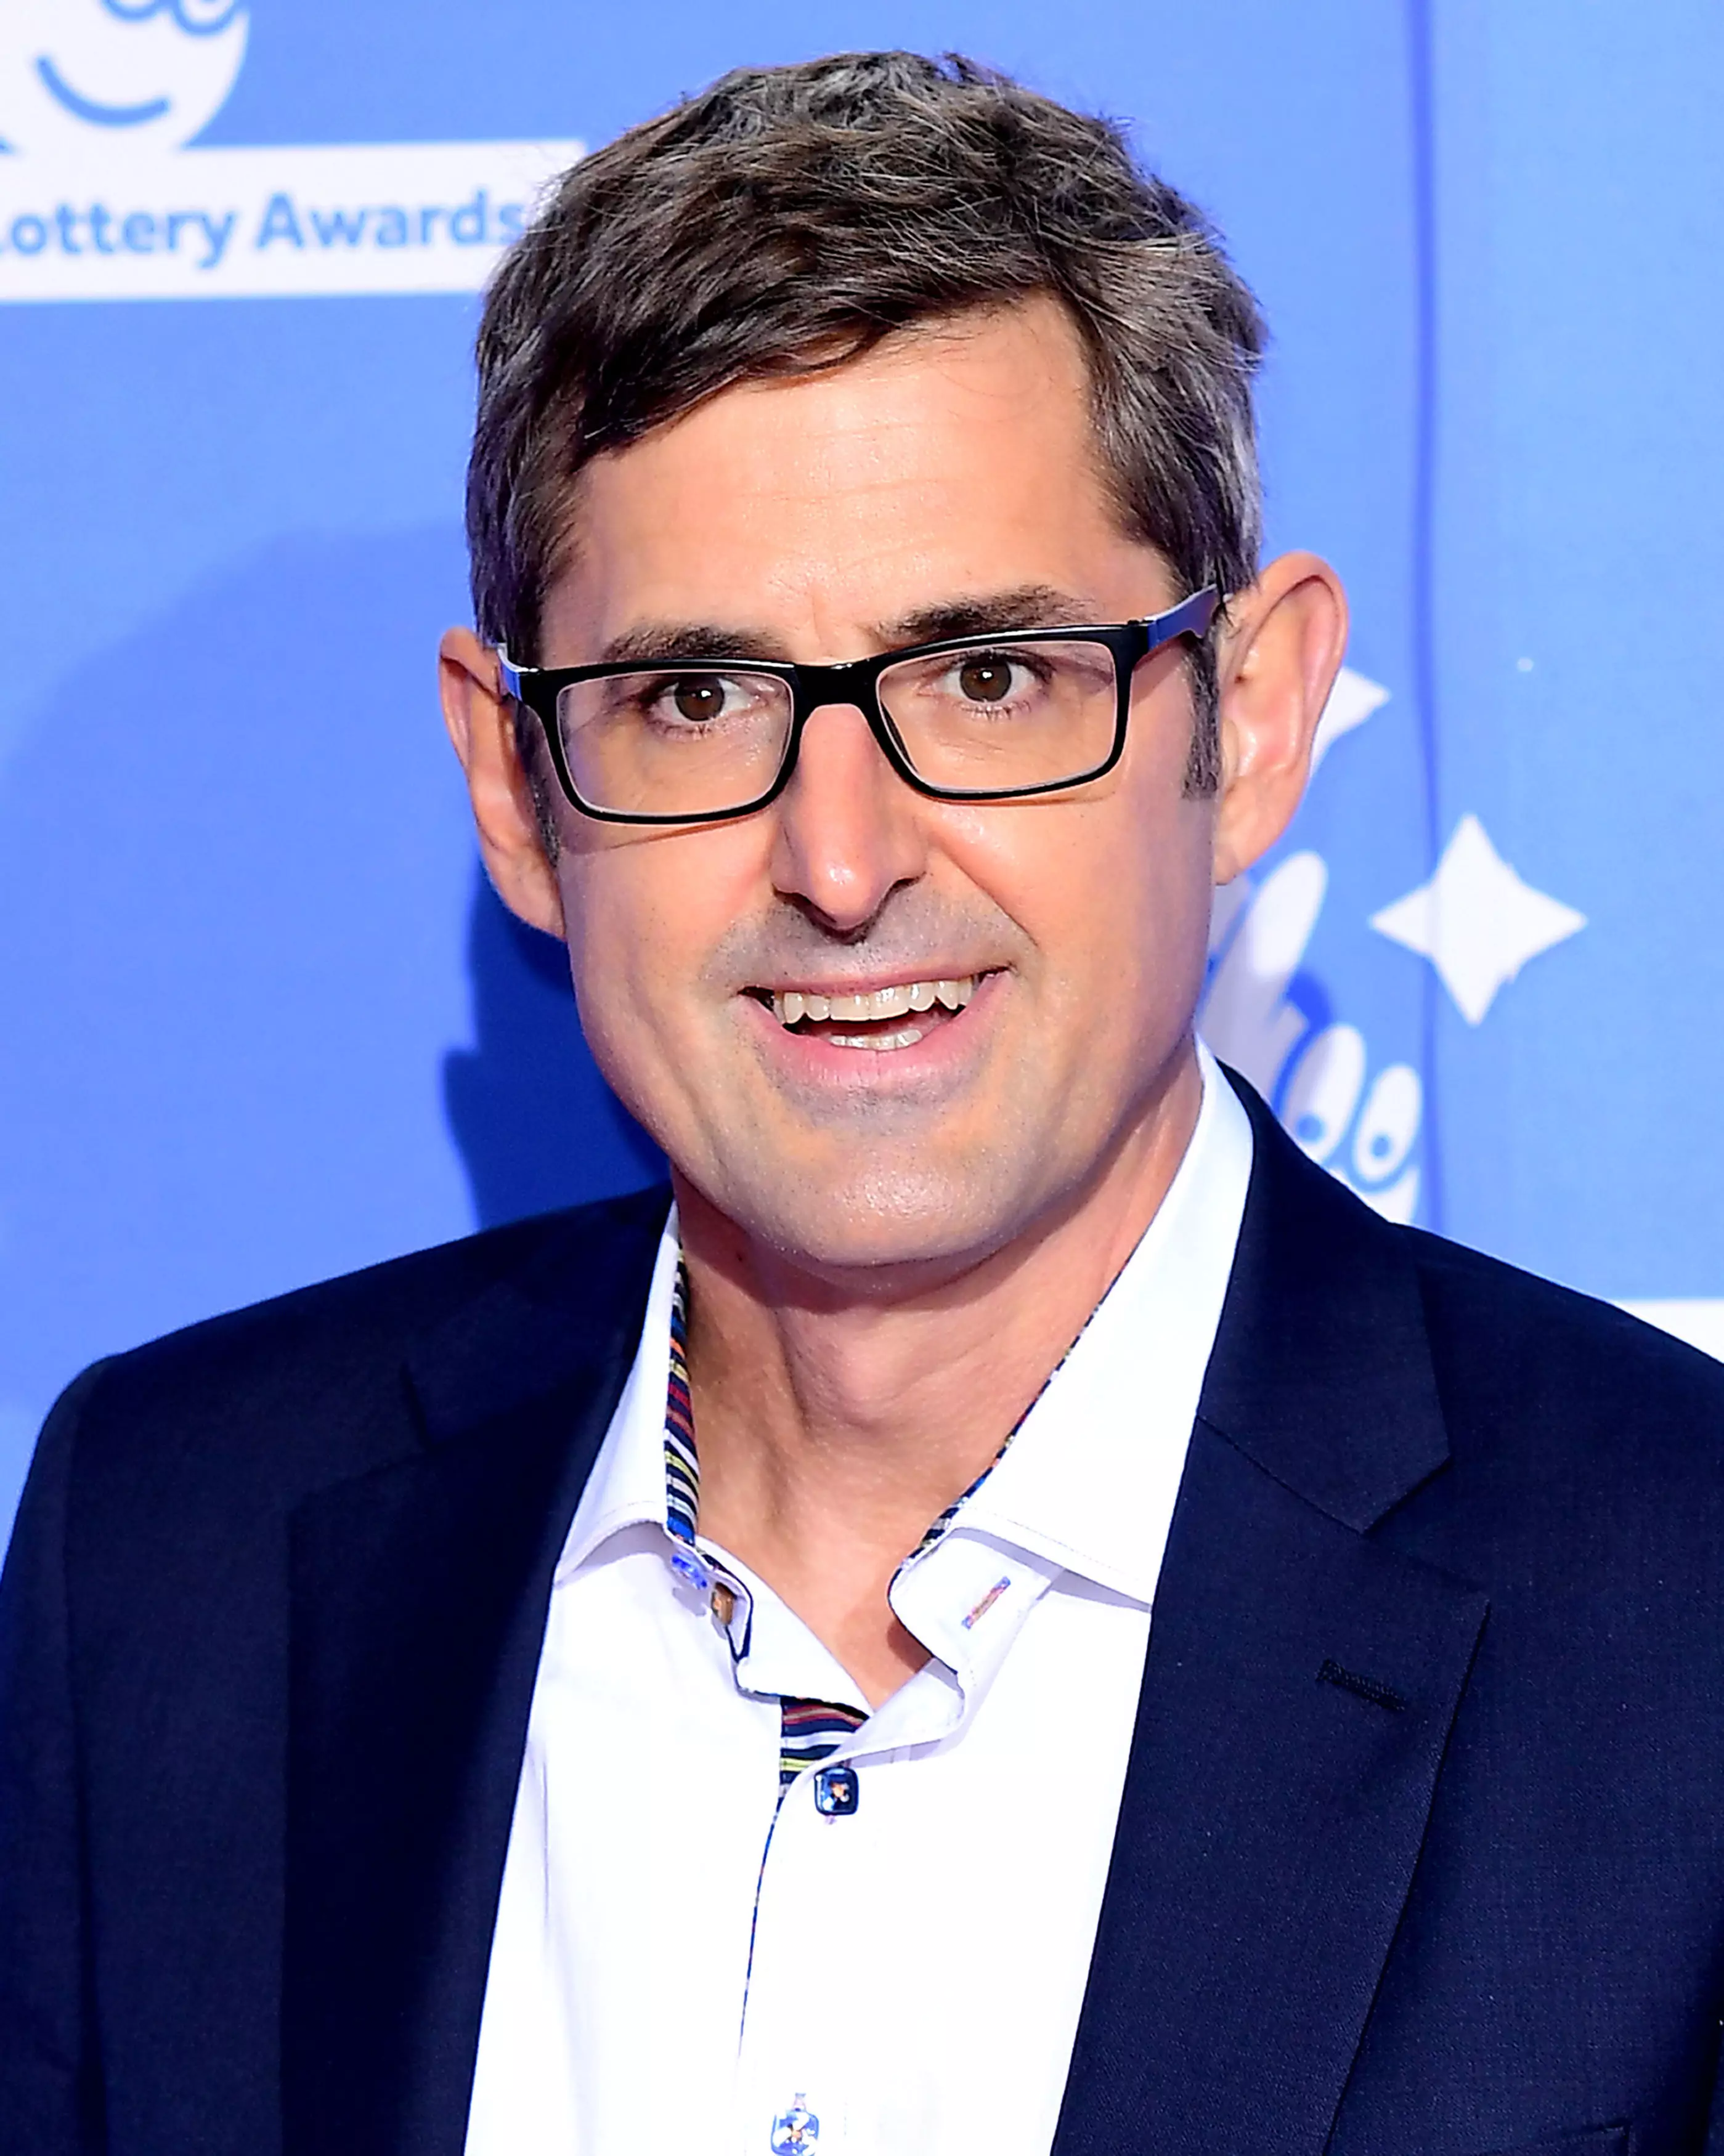 We wonder what the real Louis Theroux would think.